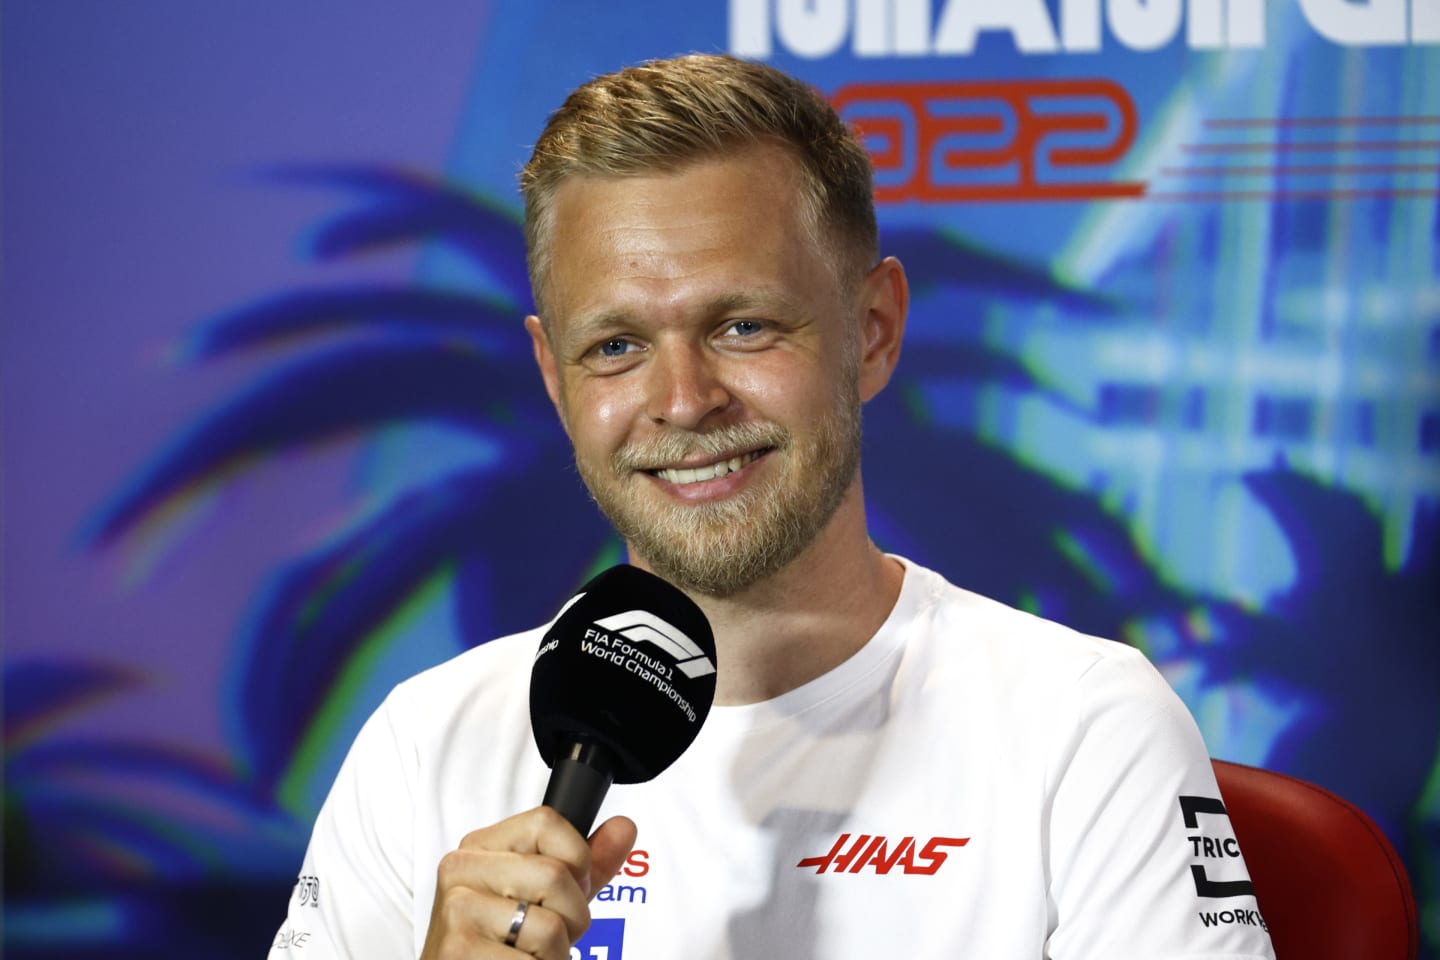 MIAMI, FLORIDA - MAY 06: Kevin Magnussen of Denmark and Haas F1 talks in the Drivers Press Conference prior to practice ahead of the F1 Grand Prix of Miami at the Miami International Autodrome on May 06, 2022 in Miami, Florida. (Photo by Jared C. Tilton/Getty Images)